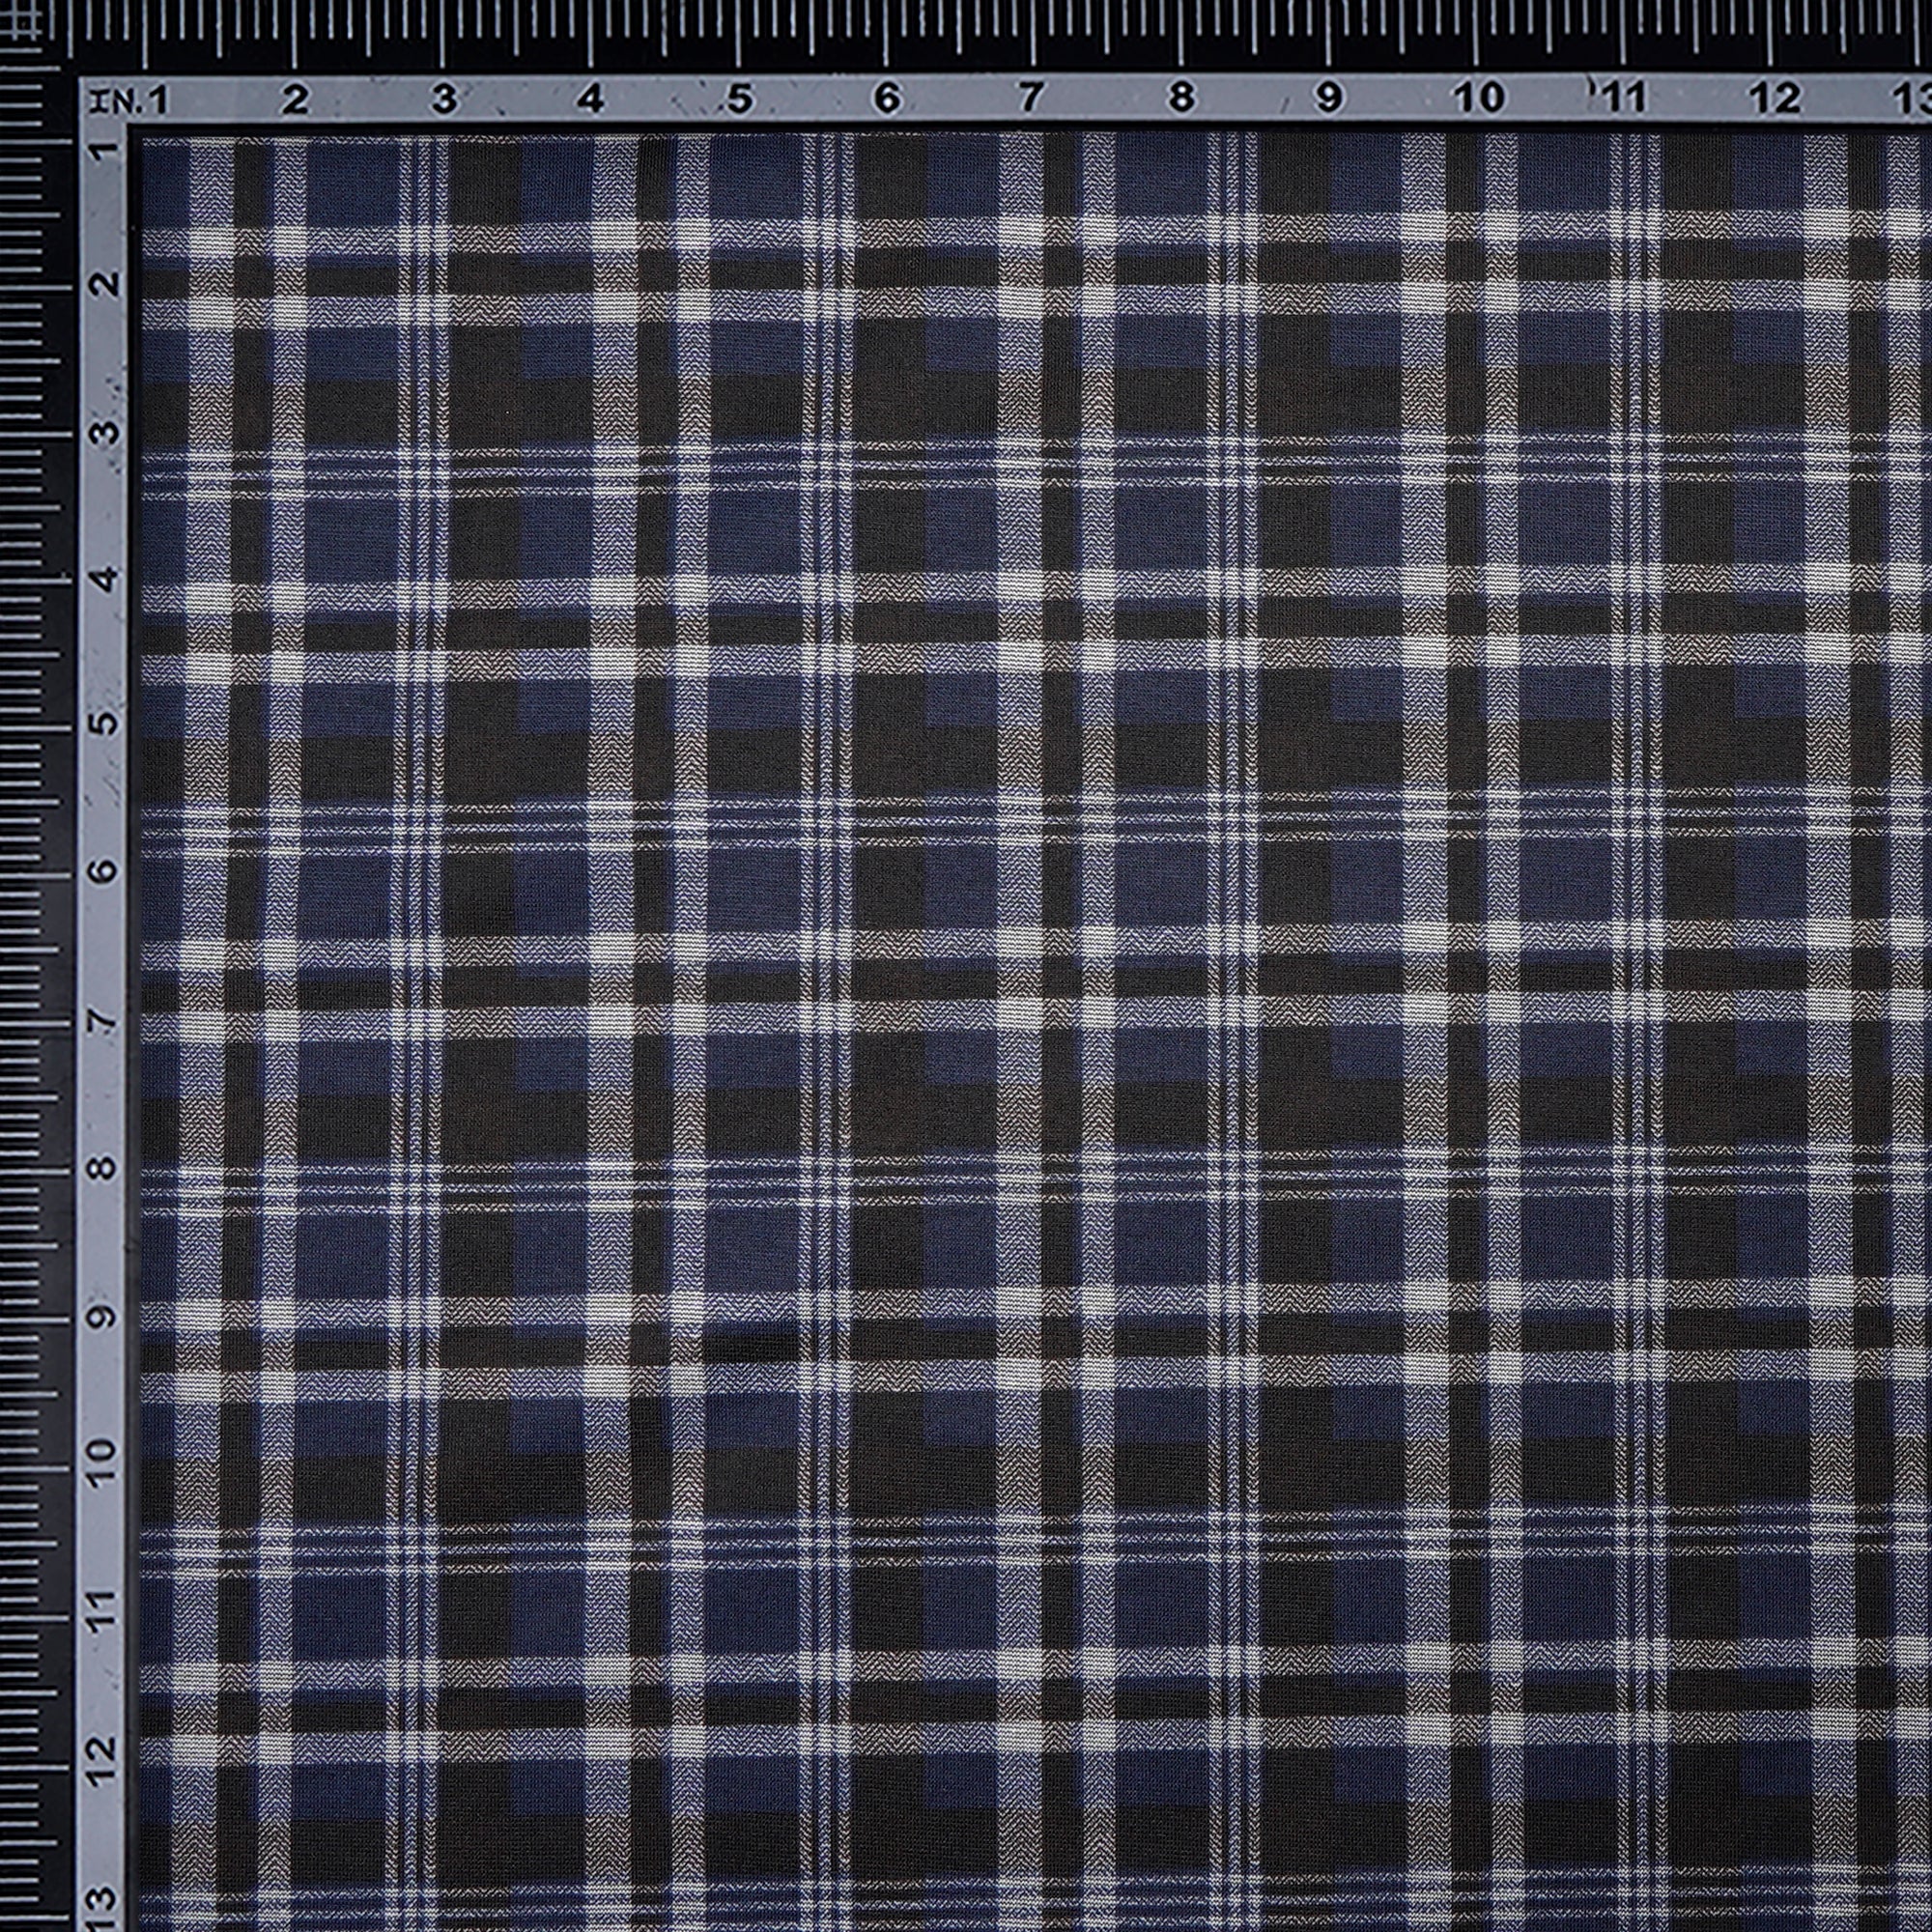 Blue-Black Check Pattern Premium Men's Collection Printed Stretch Roma Fabric (60" Width)